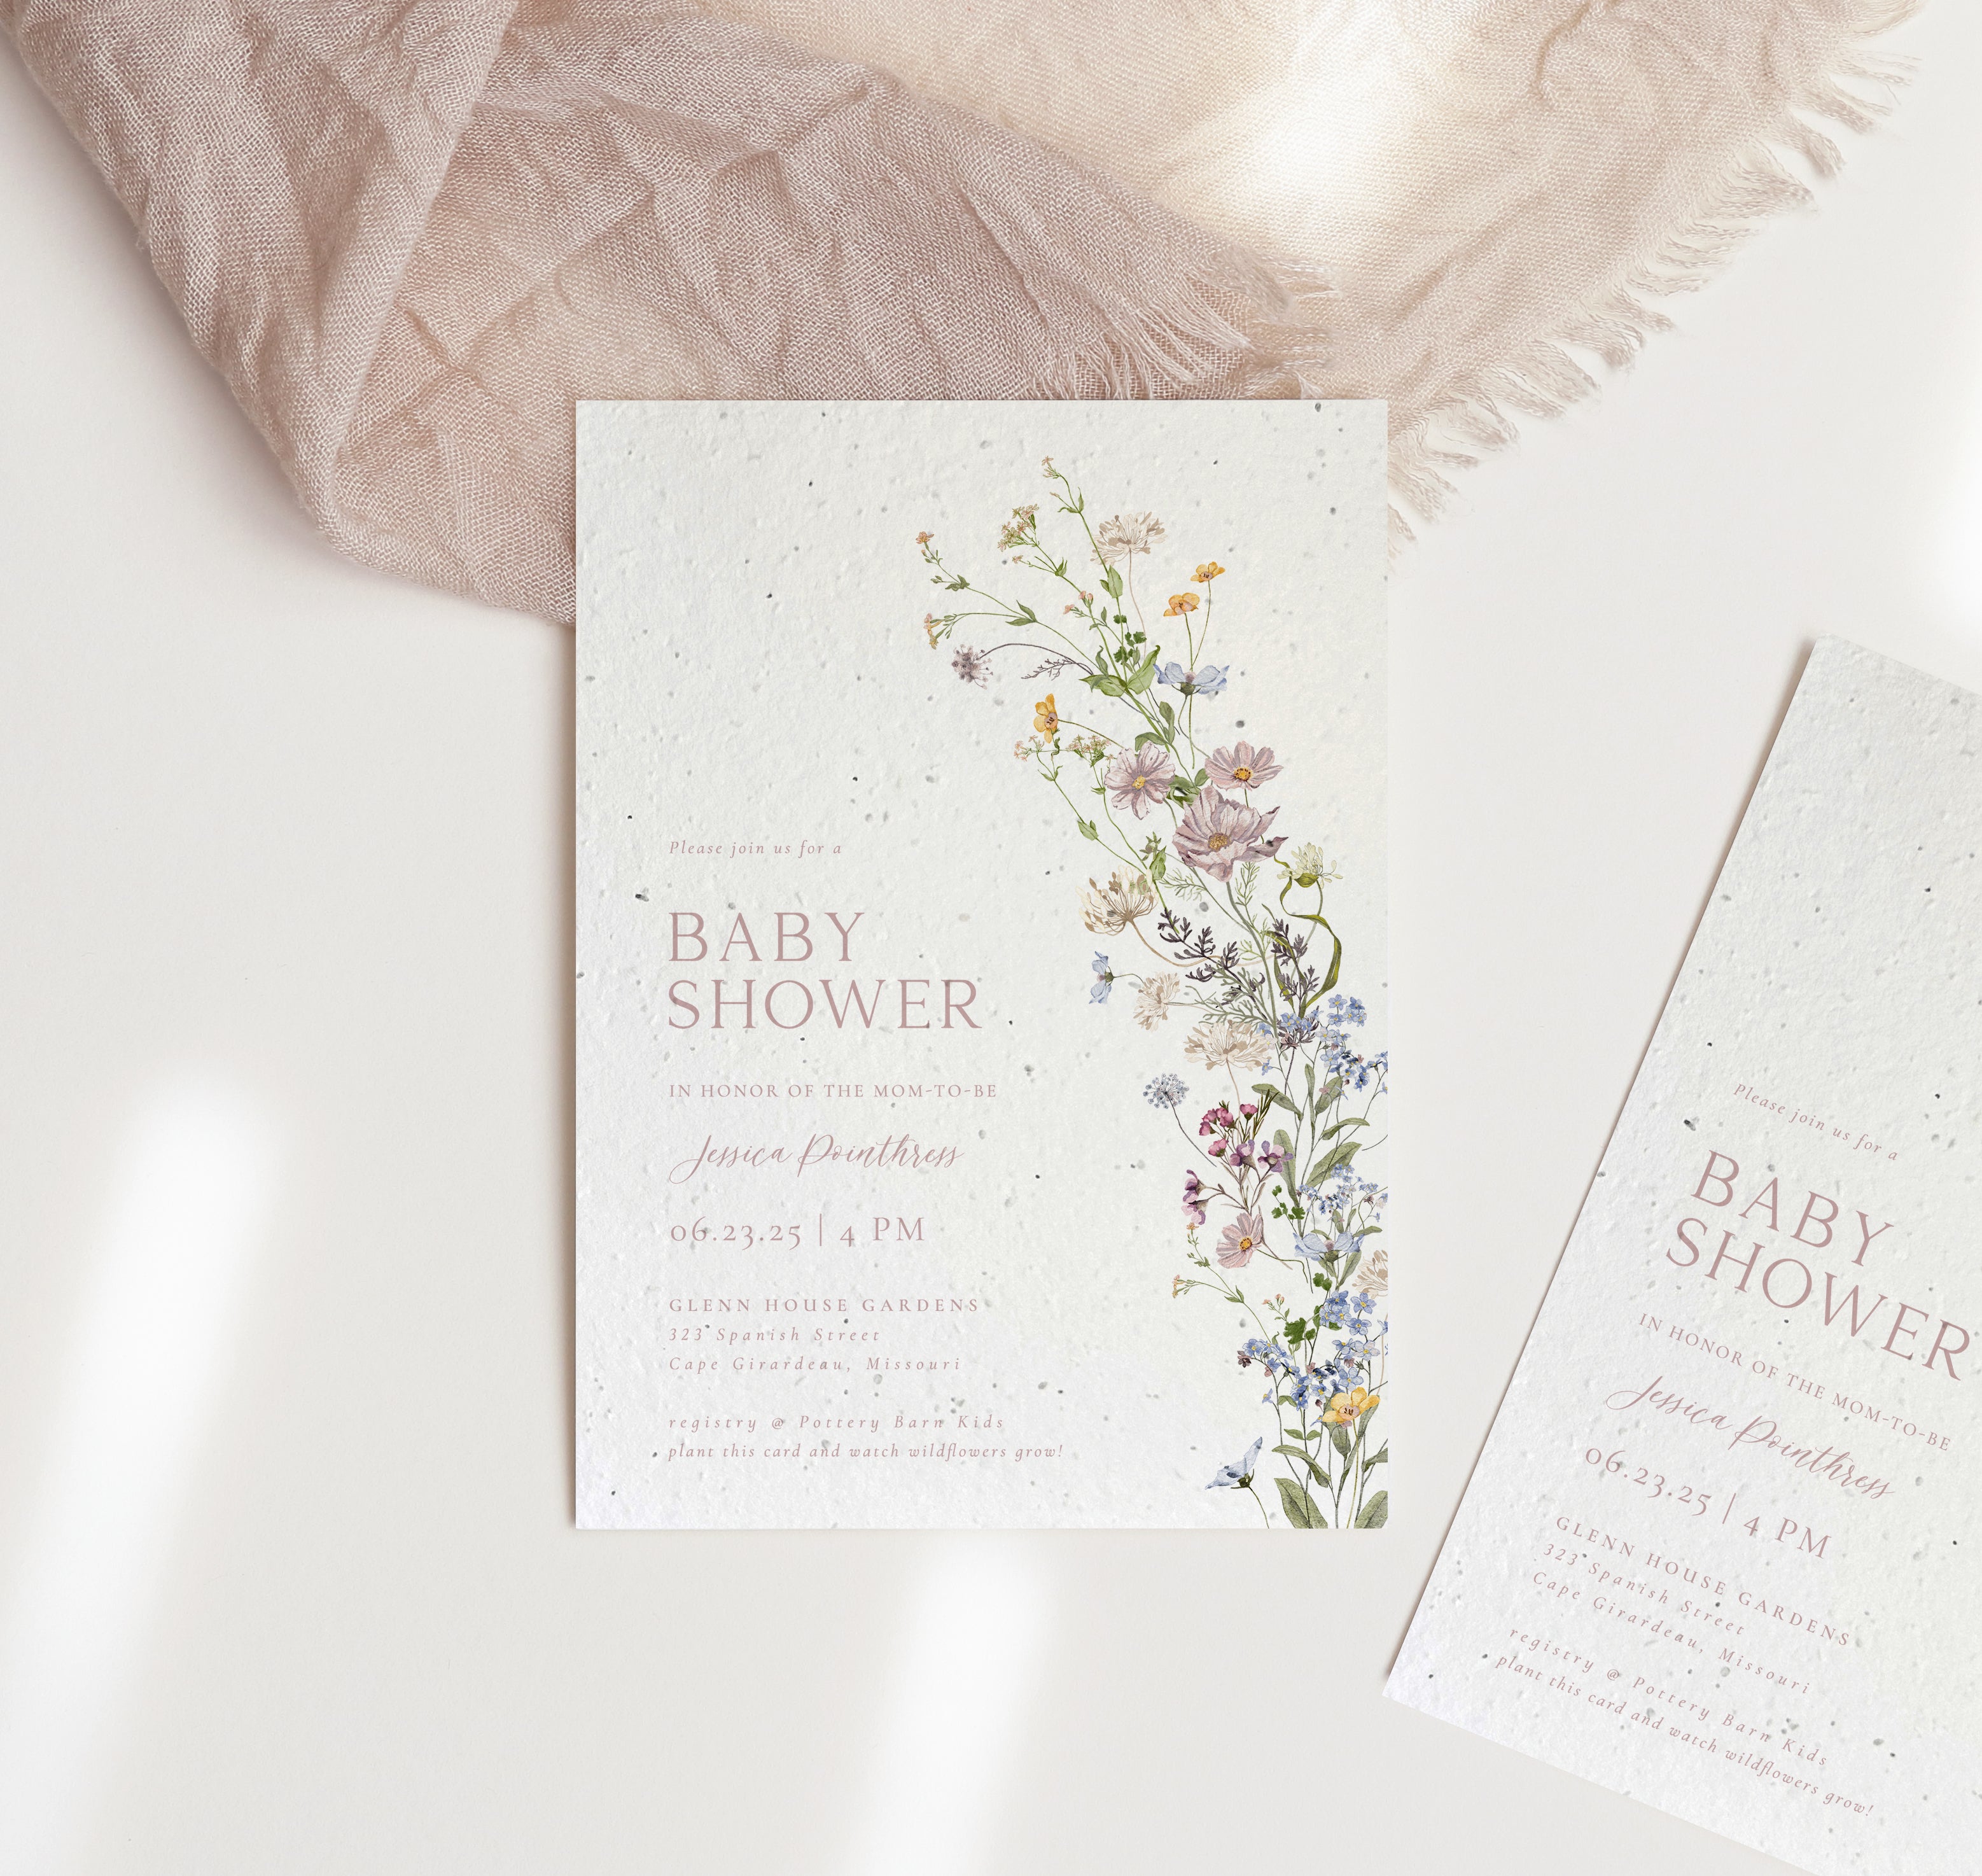 growNOTES™ Wildflower Baby Shower Plantable Invitation - Dusty Meadow